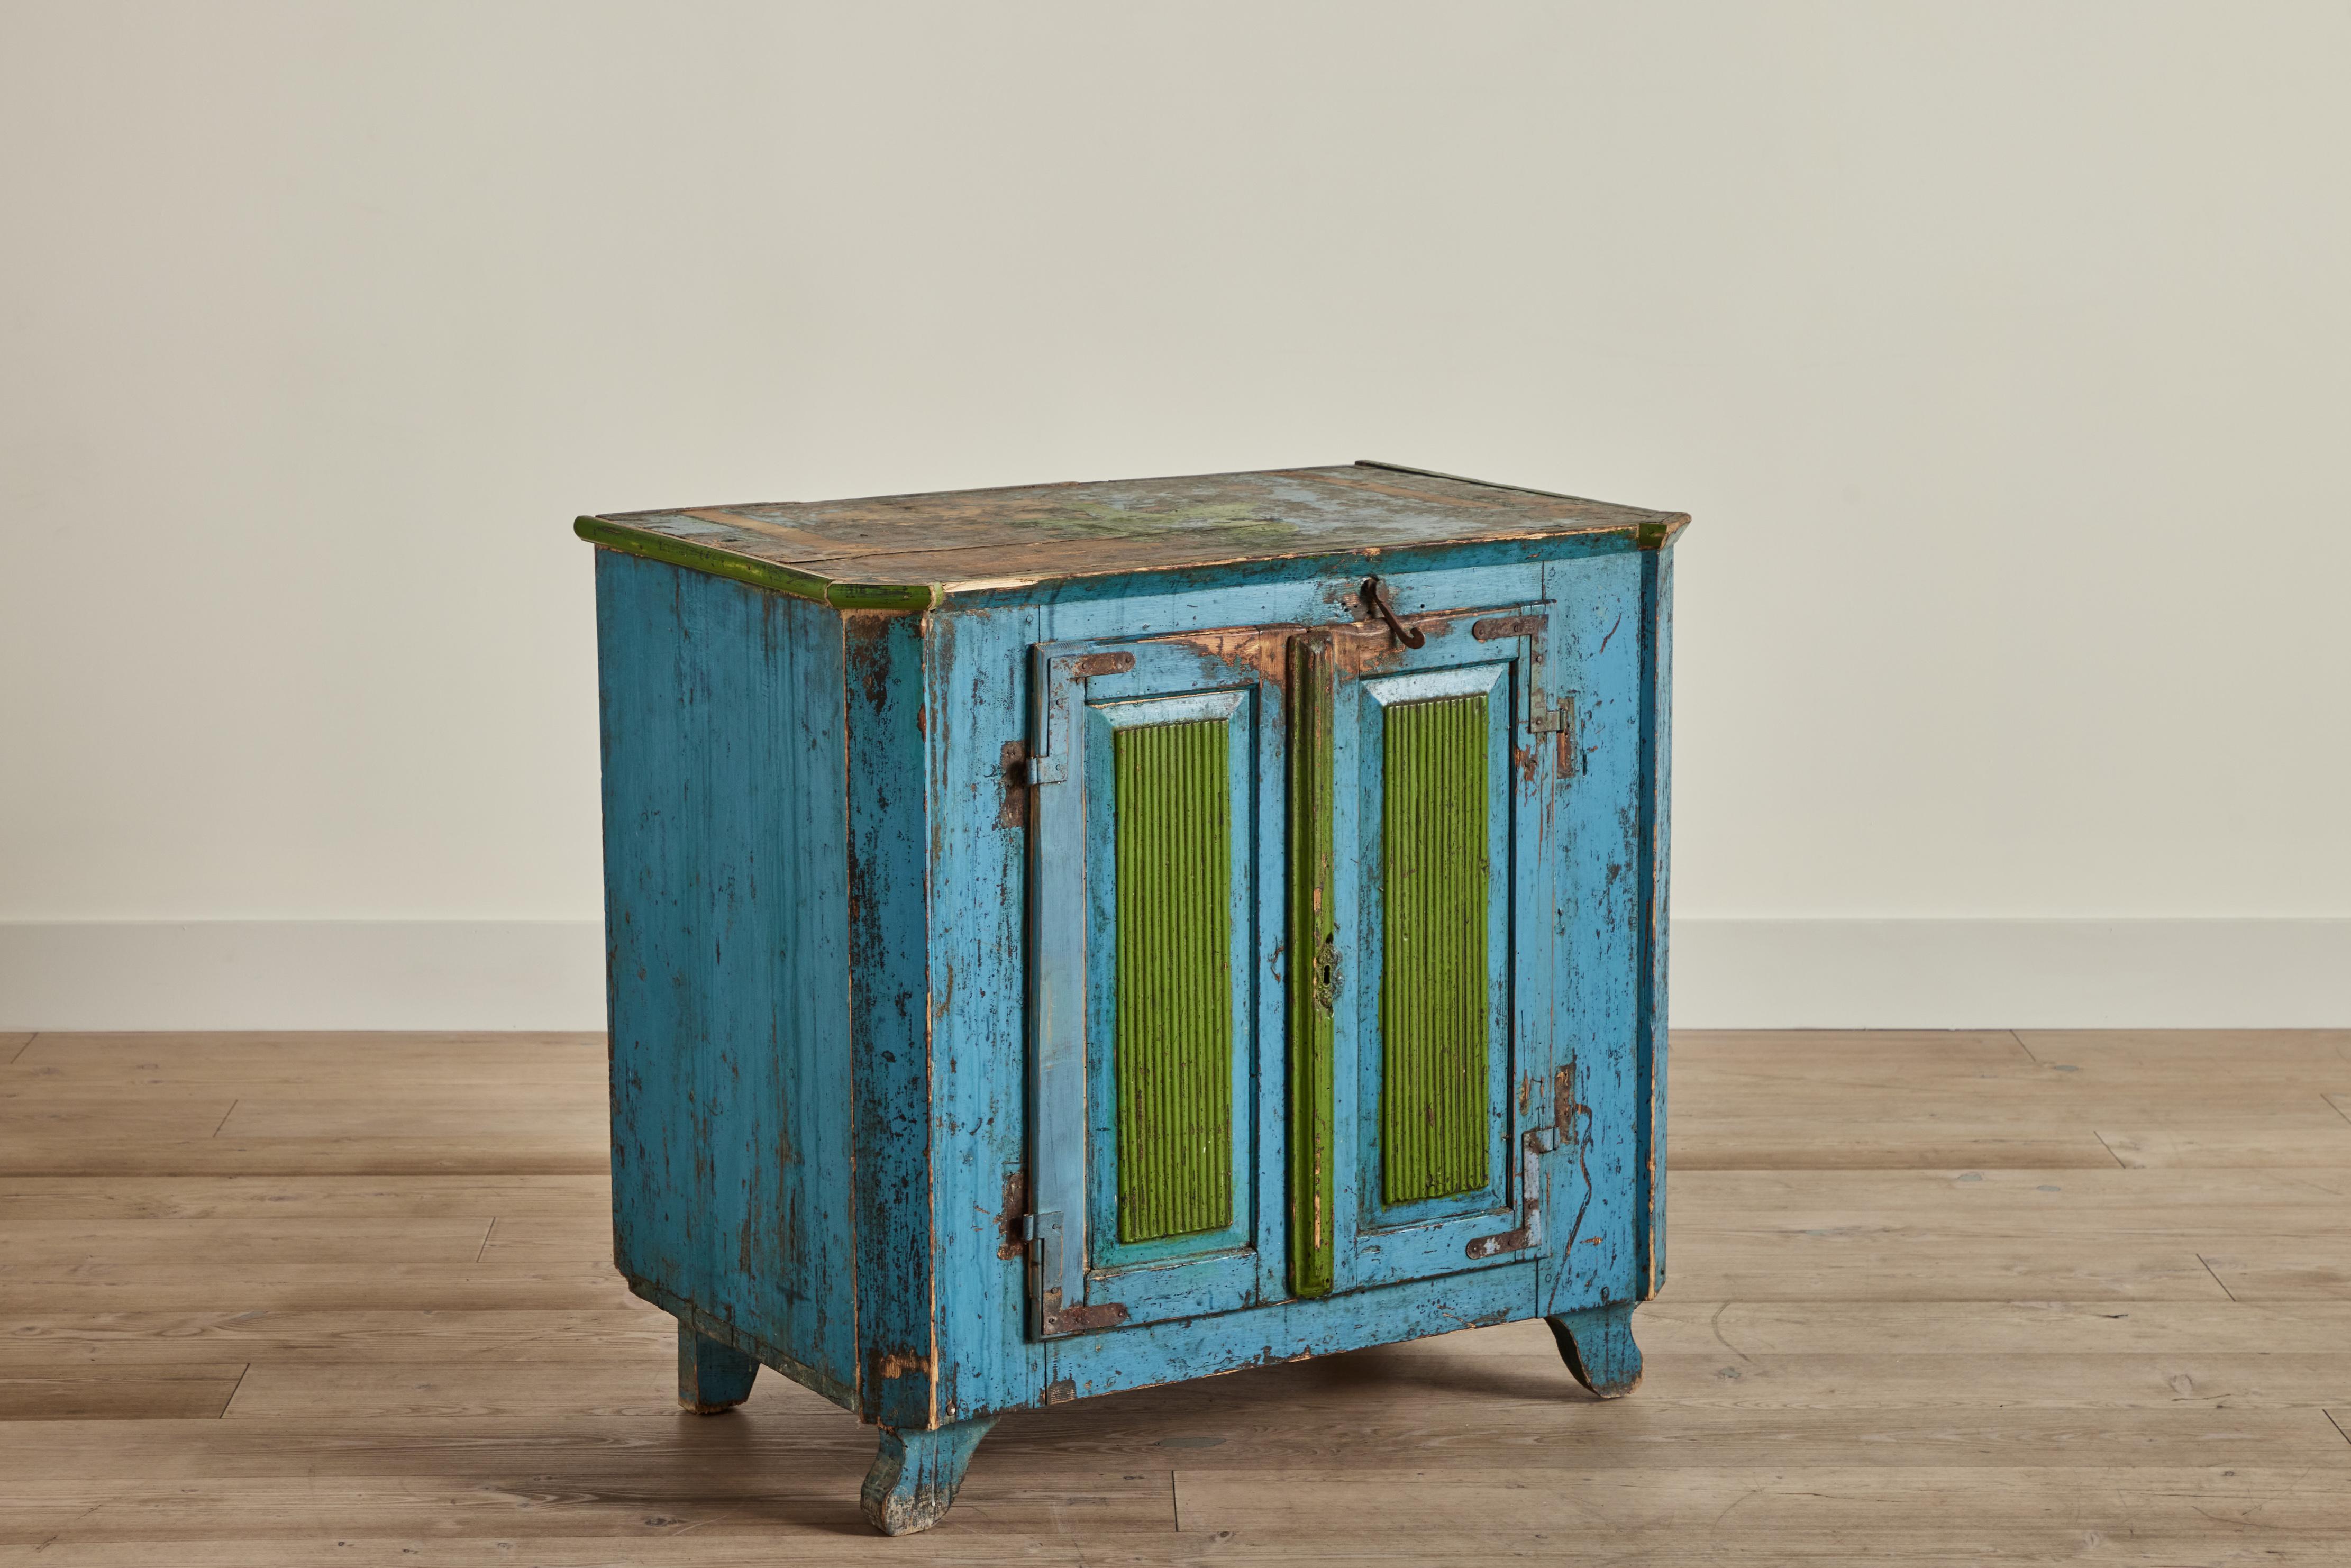 Late 19th century blue and green painted jelly cupboard from Hungary. Heavy wear throughout on wood and painted finish is consistent with age and use. 